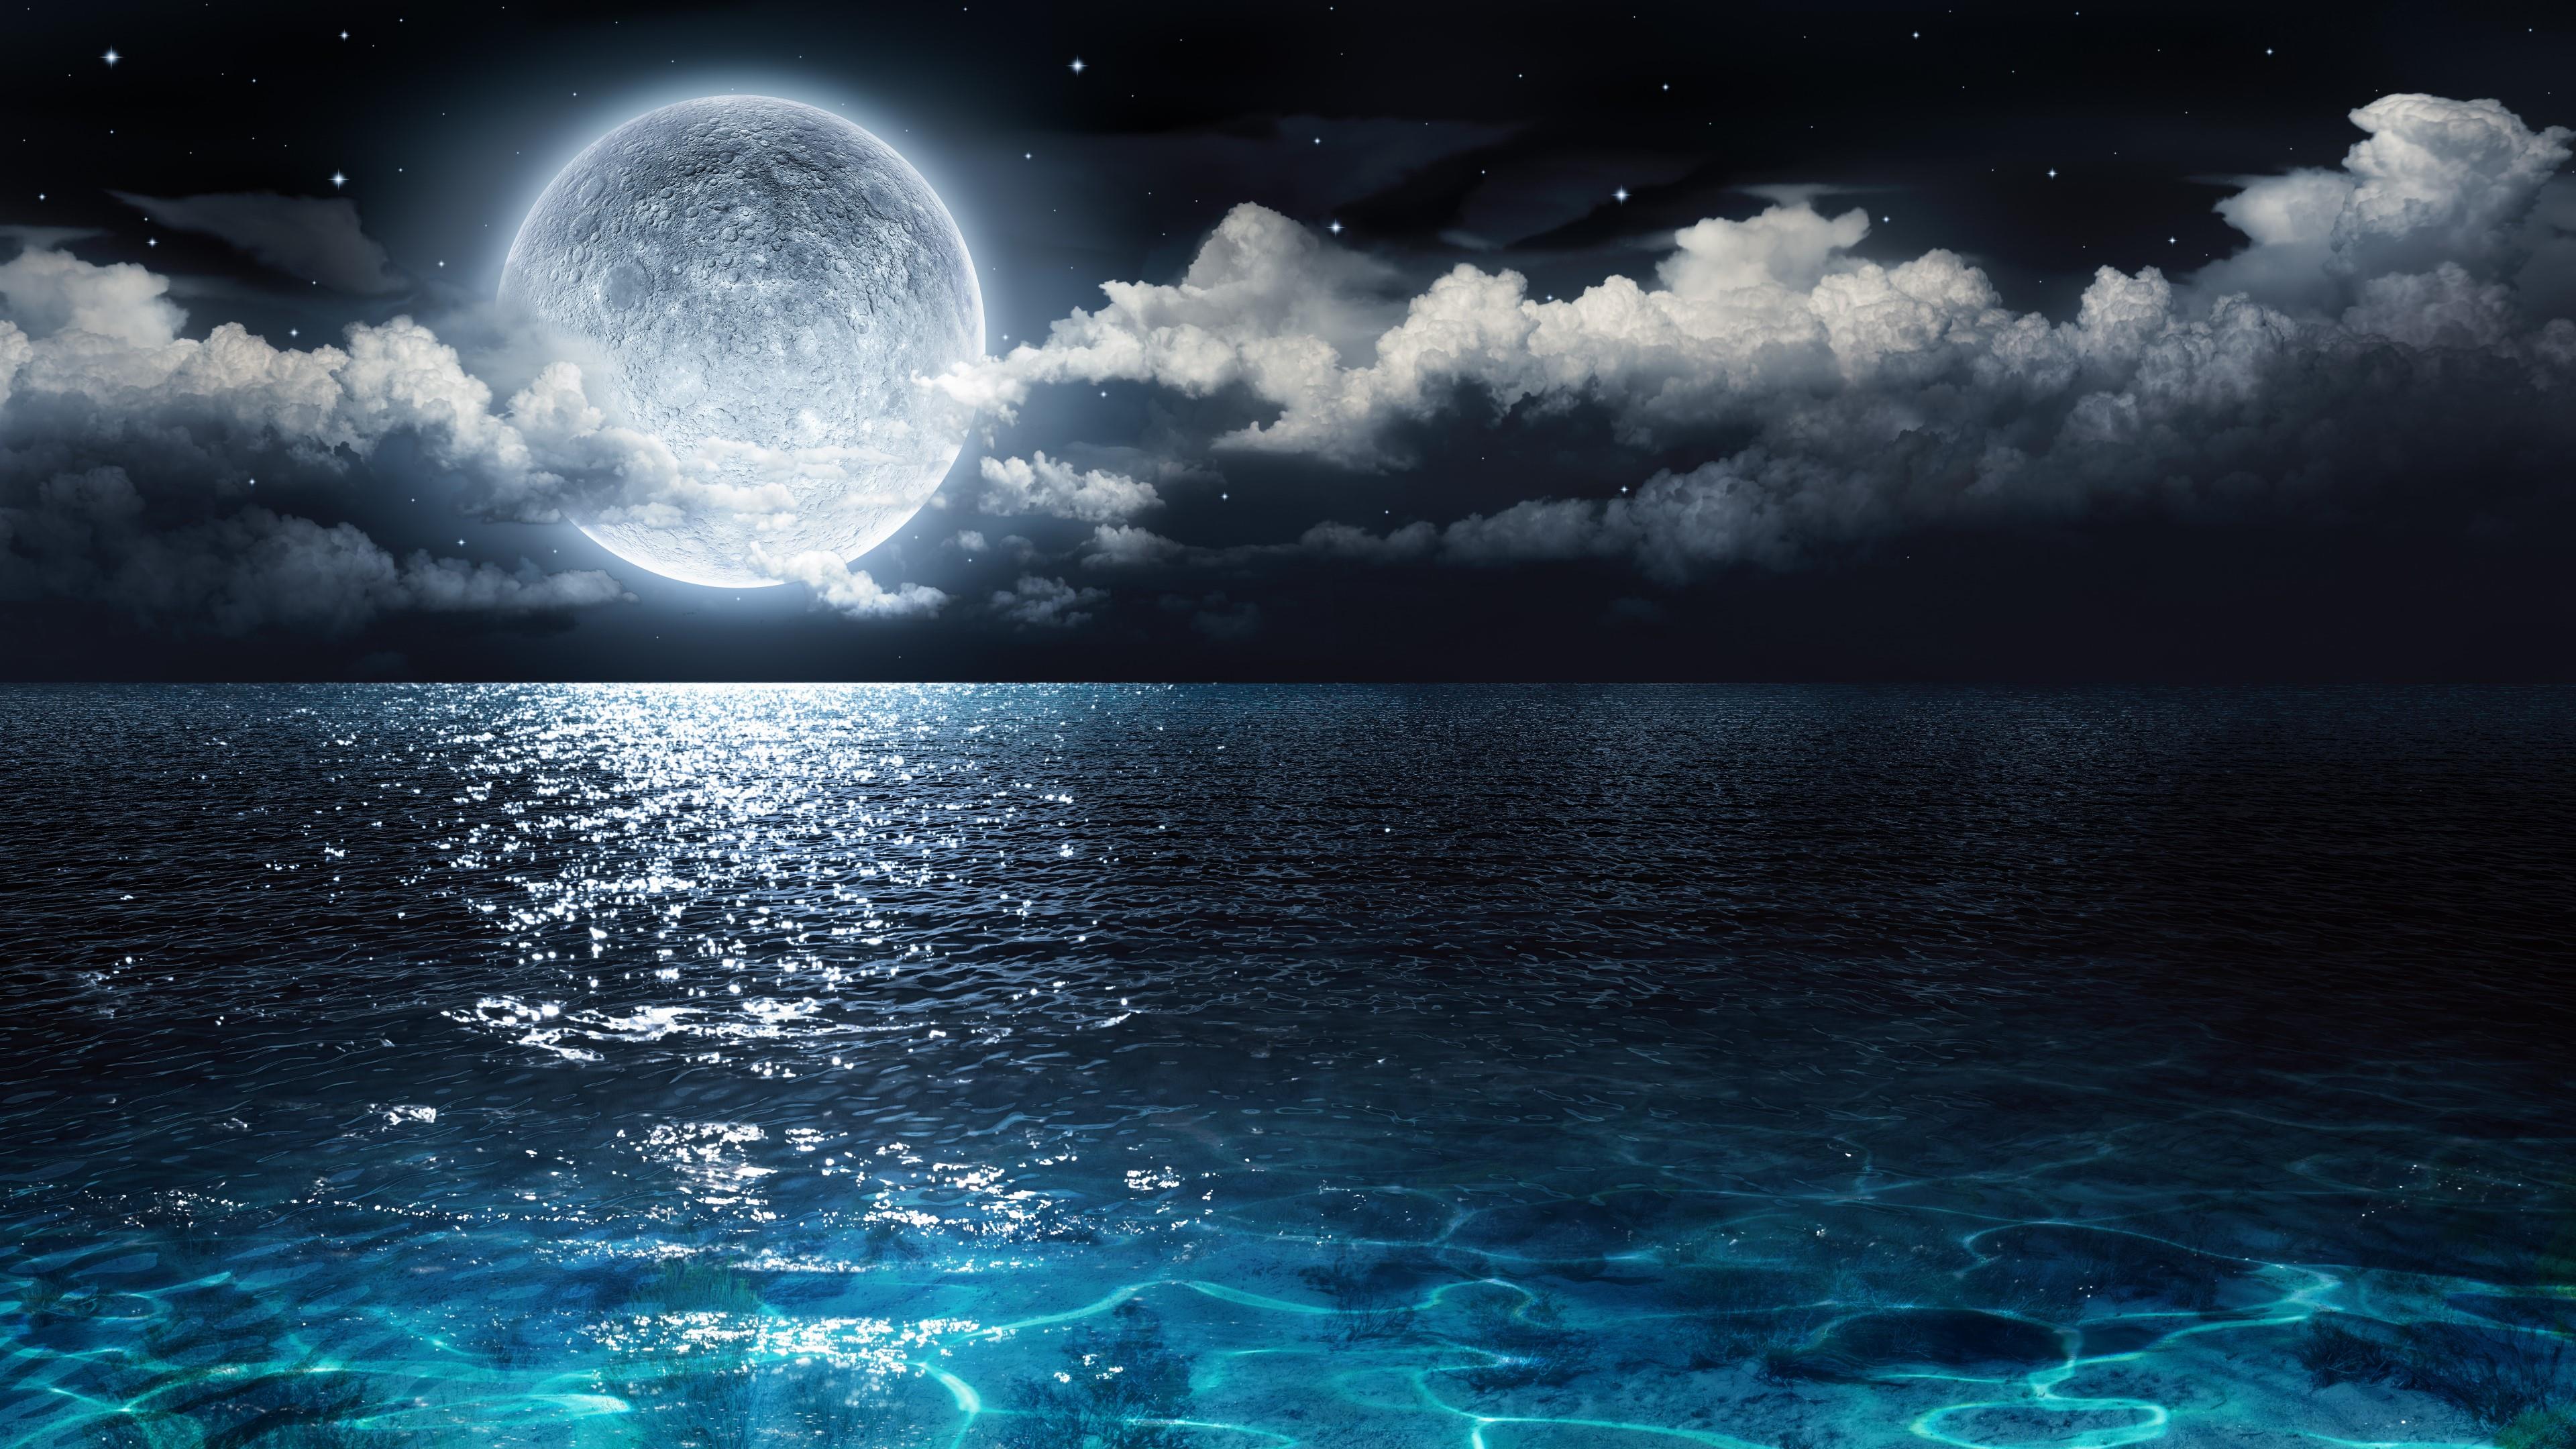 4k Ultrahd Wallpaper Icon Wallpaper From Nature Category - Full Moon Over Water , HD Wallpaper & Backgrounds